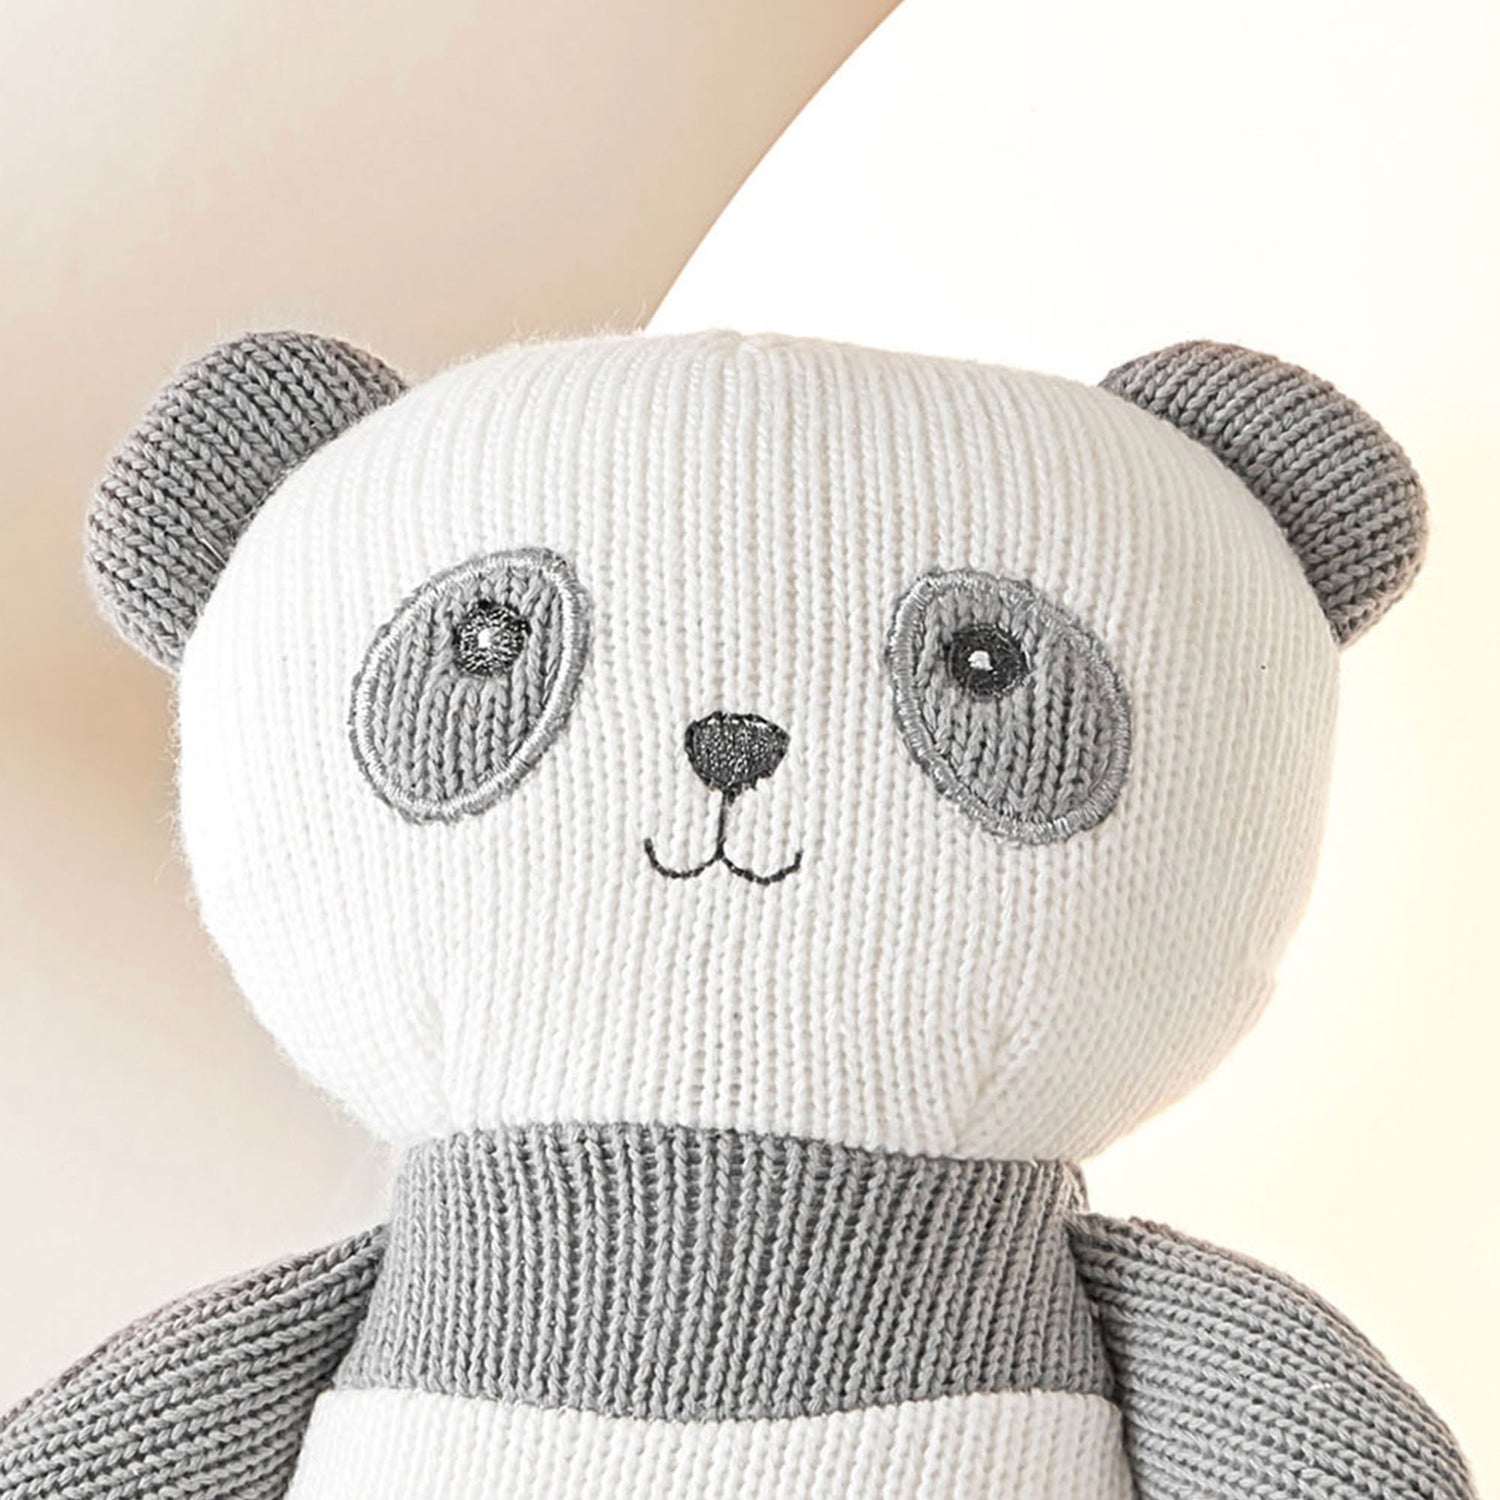 A close-up photo of a stuffed panda bear. The panda bear is made of soft, black and white fabric. It has round black eyes and a stitched black nose and mouth.